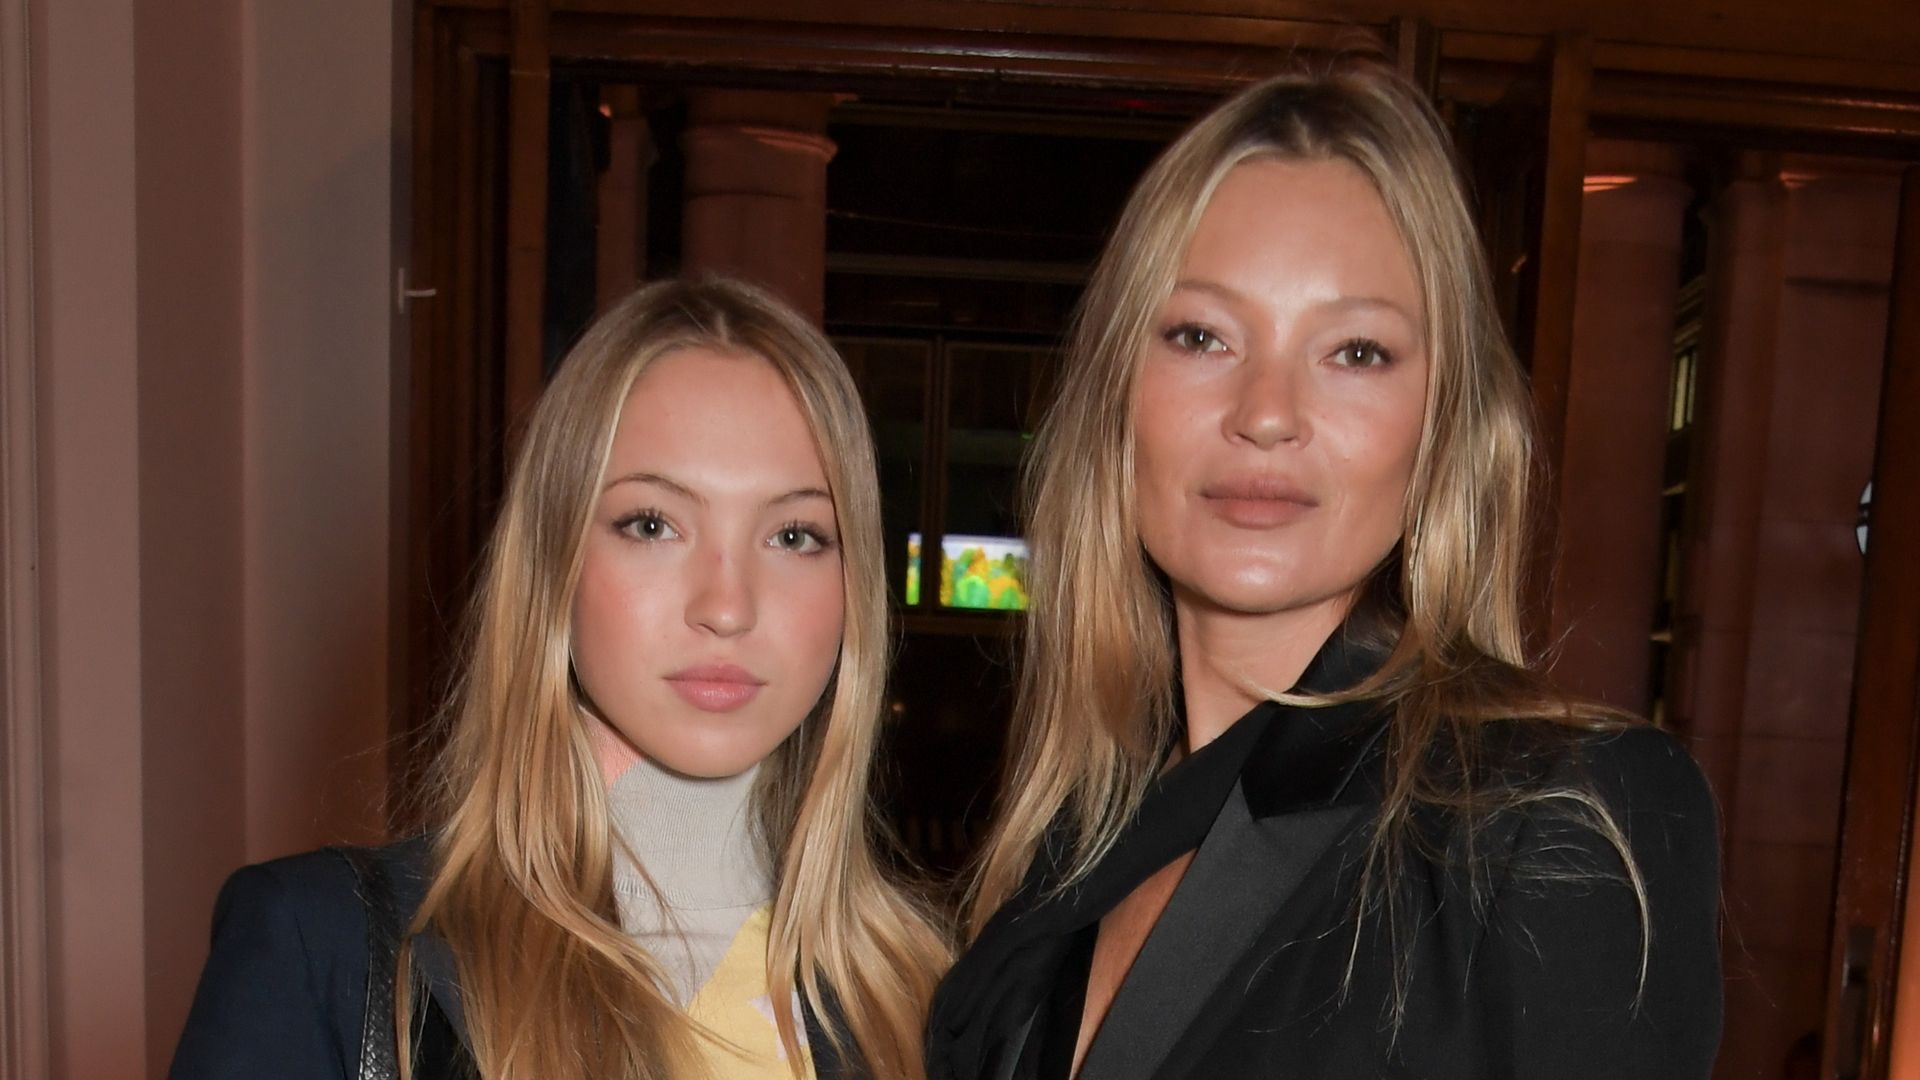 Kate and Lila Moss Kate and Lila Moss twinning yet again at a London event back in 2022 yet again at a London event back in 2022